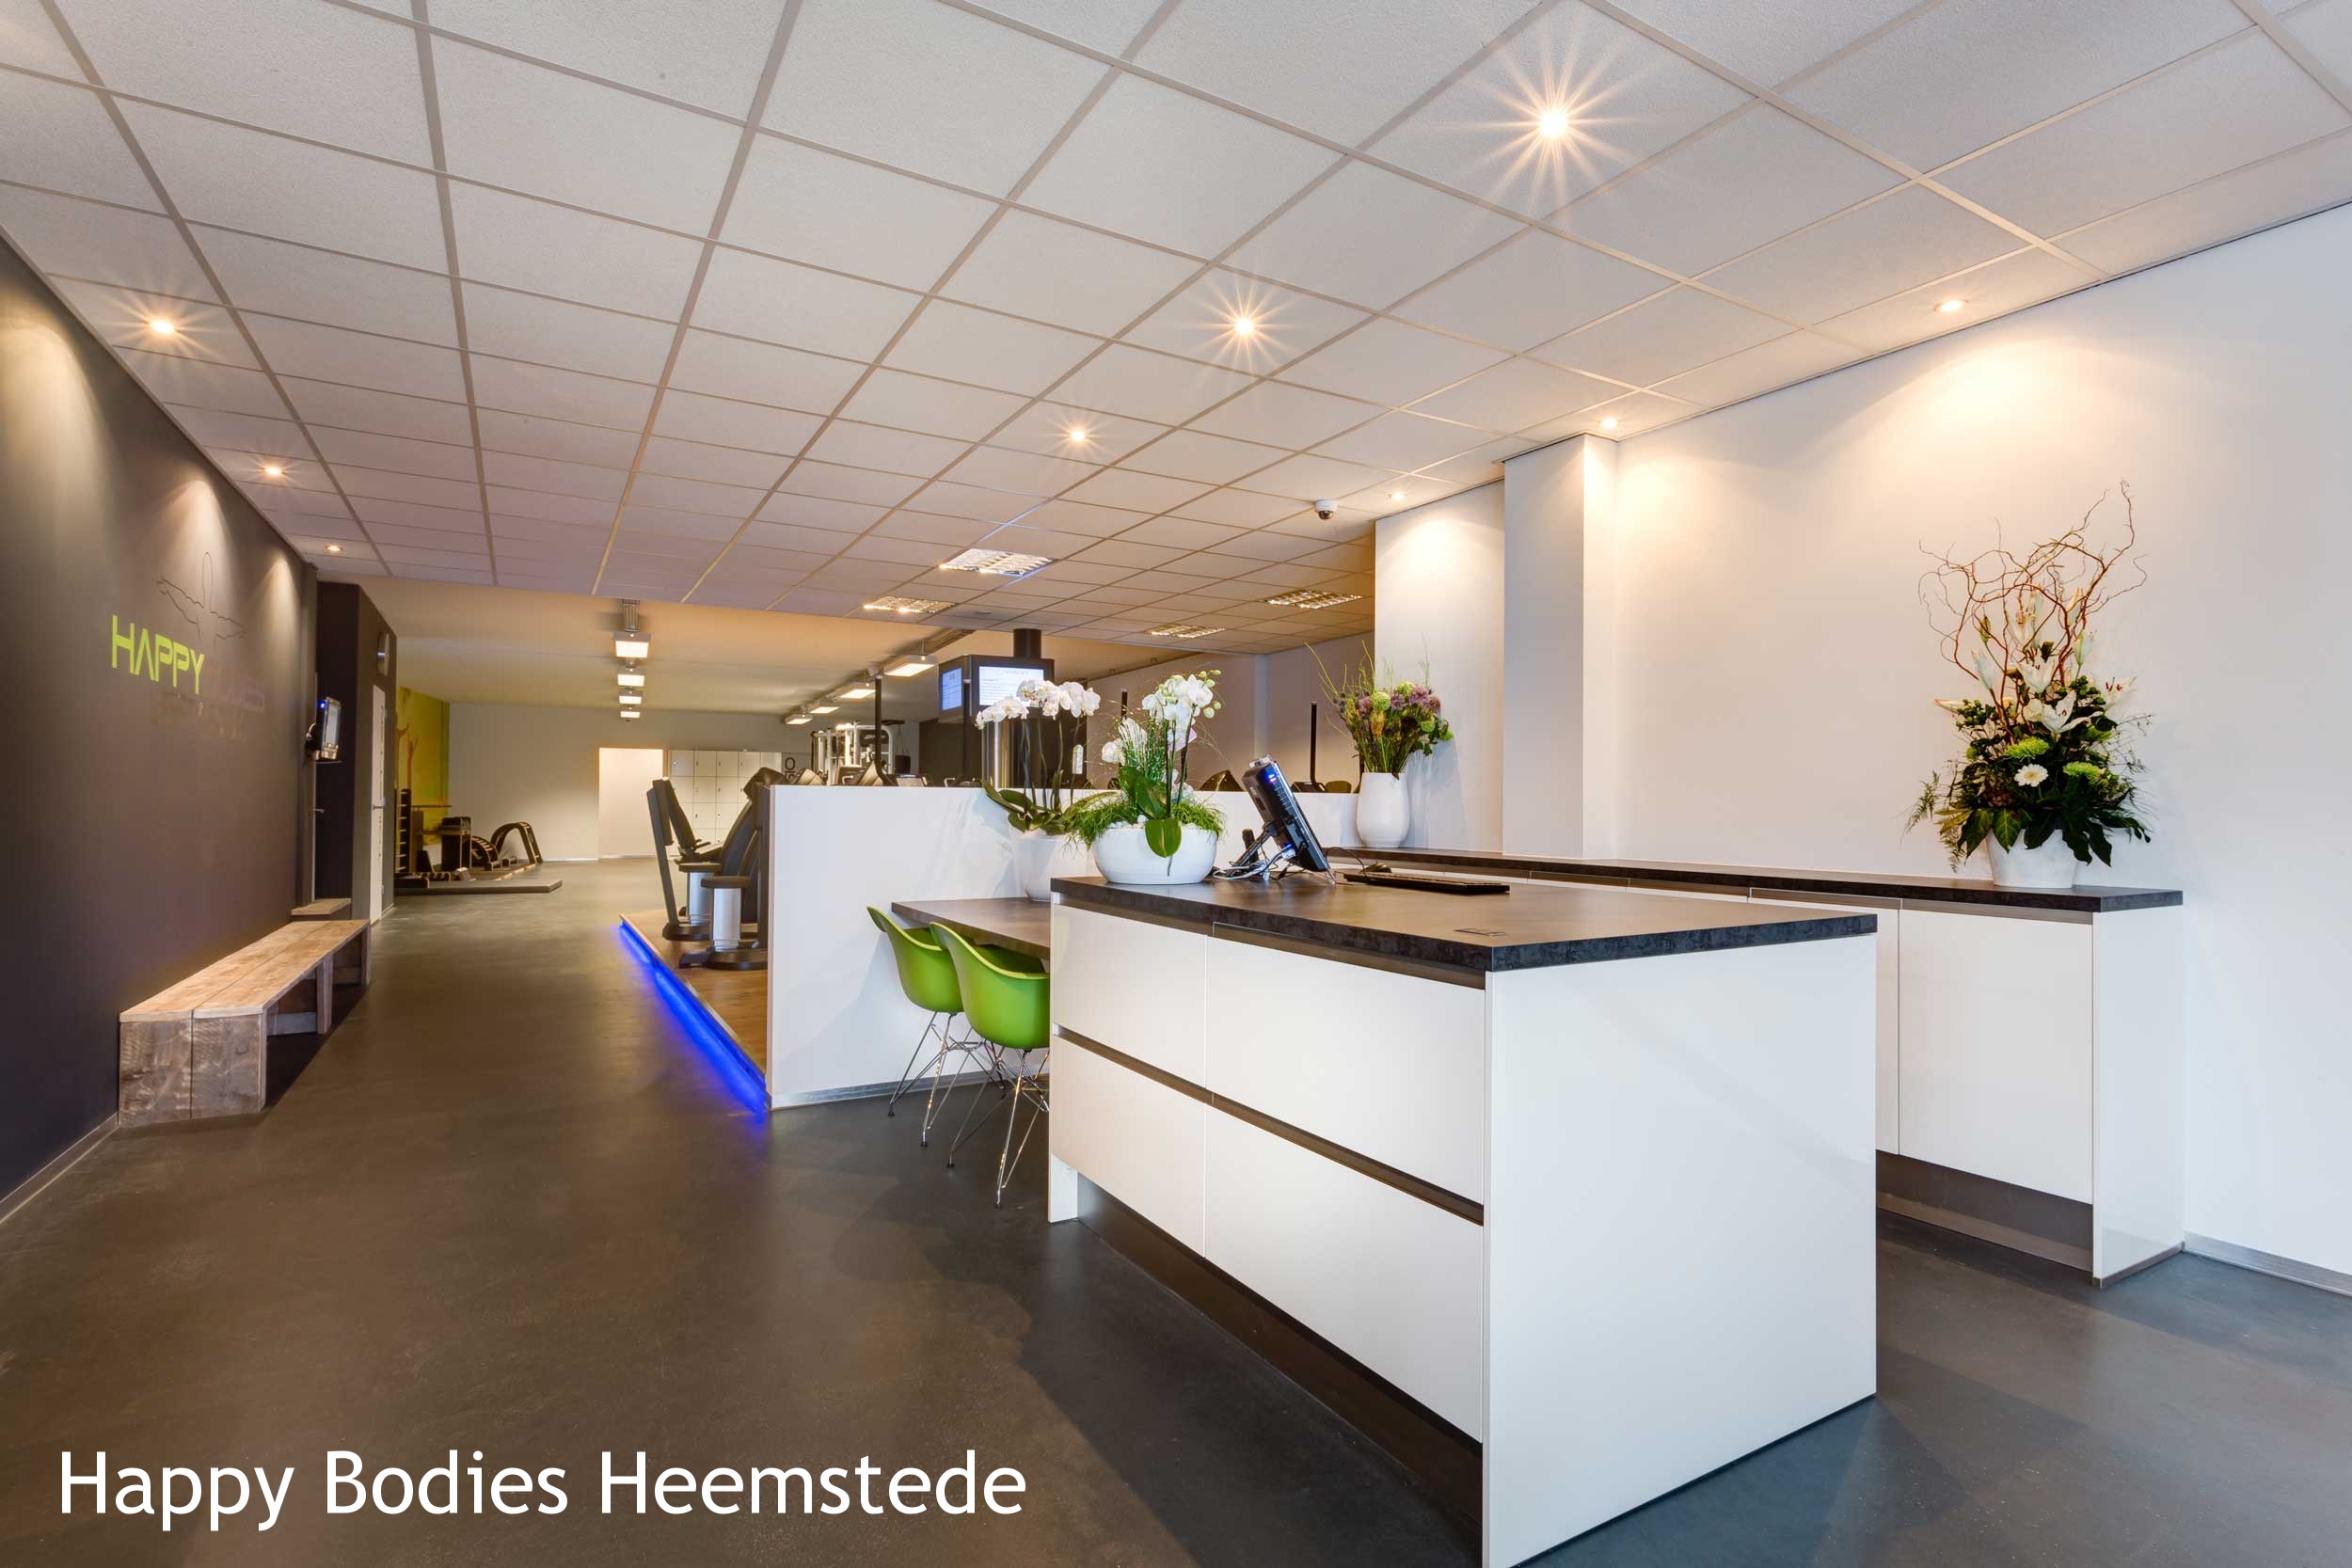 Happy Bodies Heemstede - Local Minded